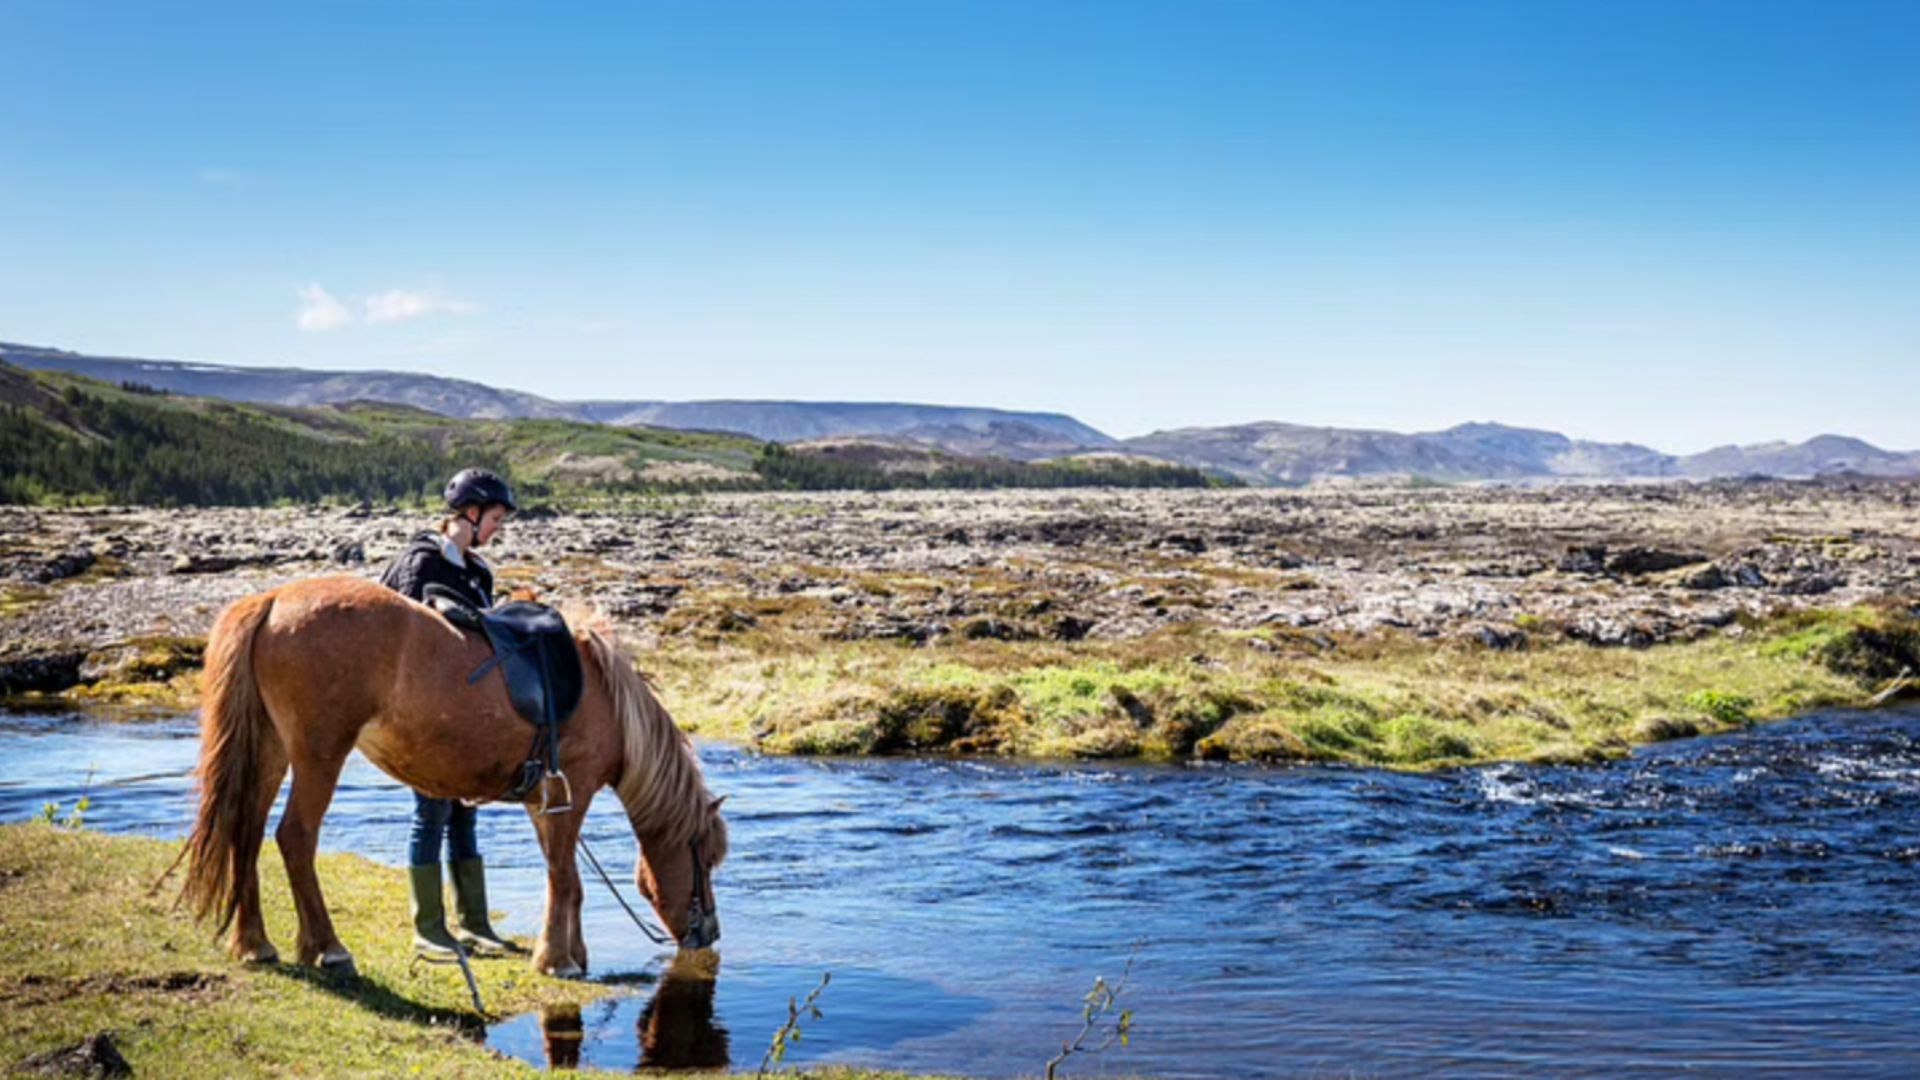 Horse drinking water from river on horseback riding tour in Iceland